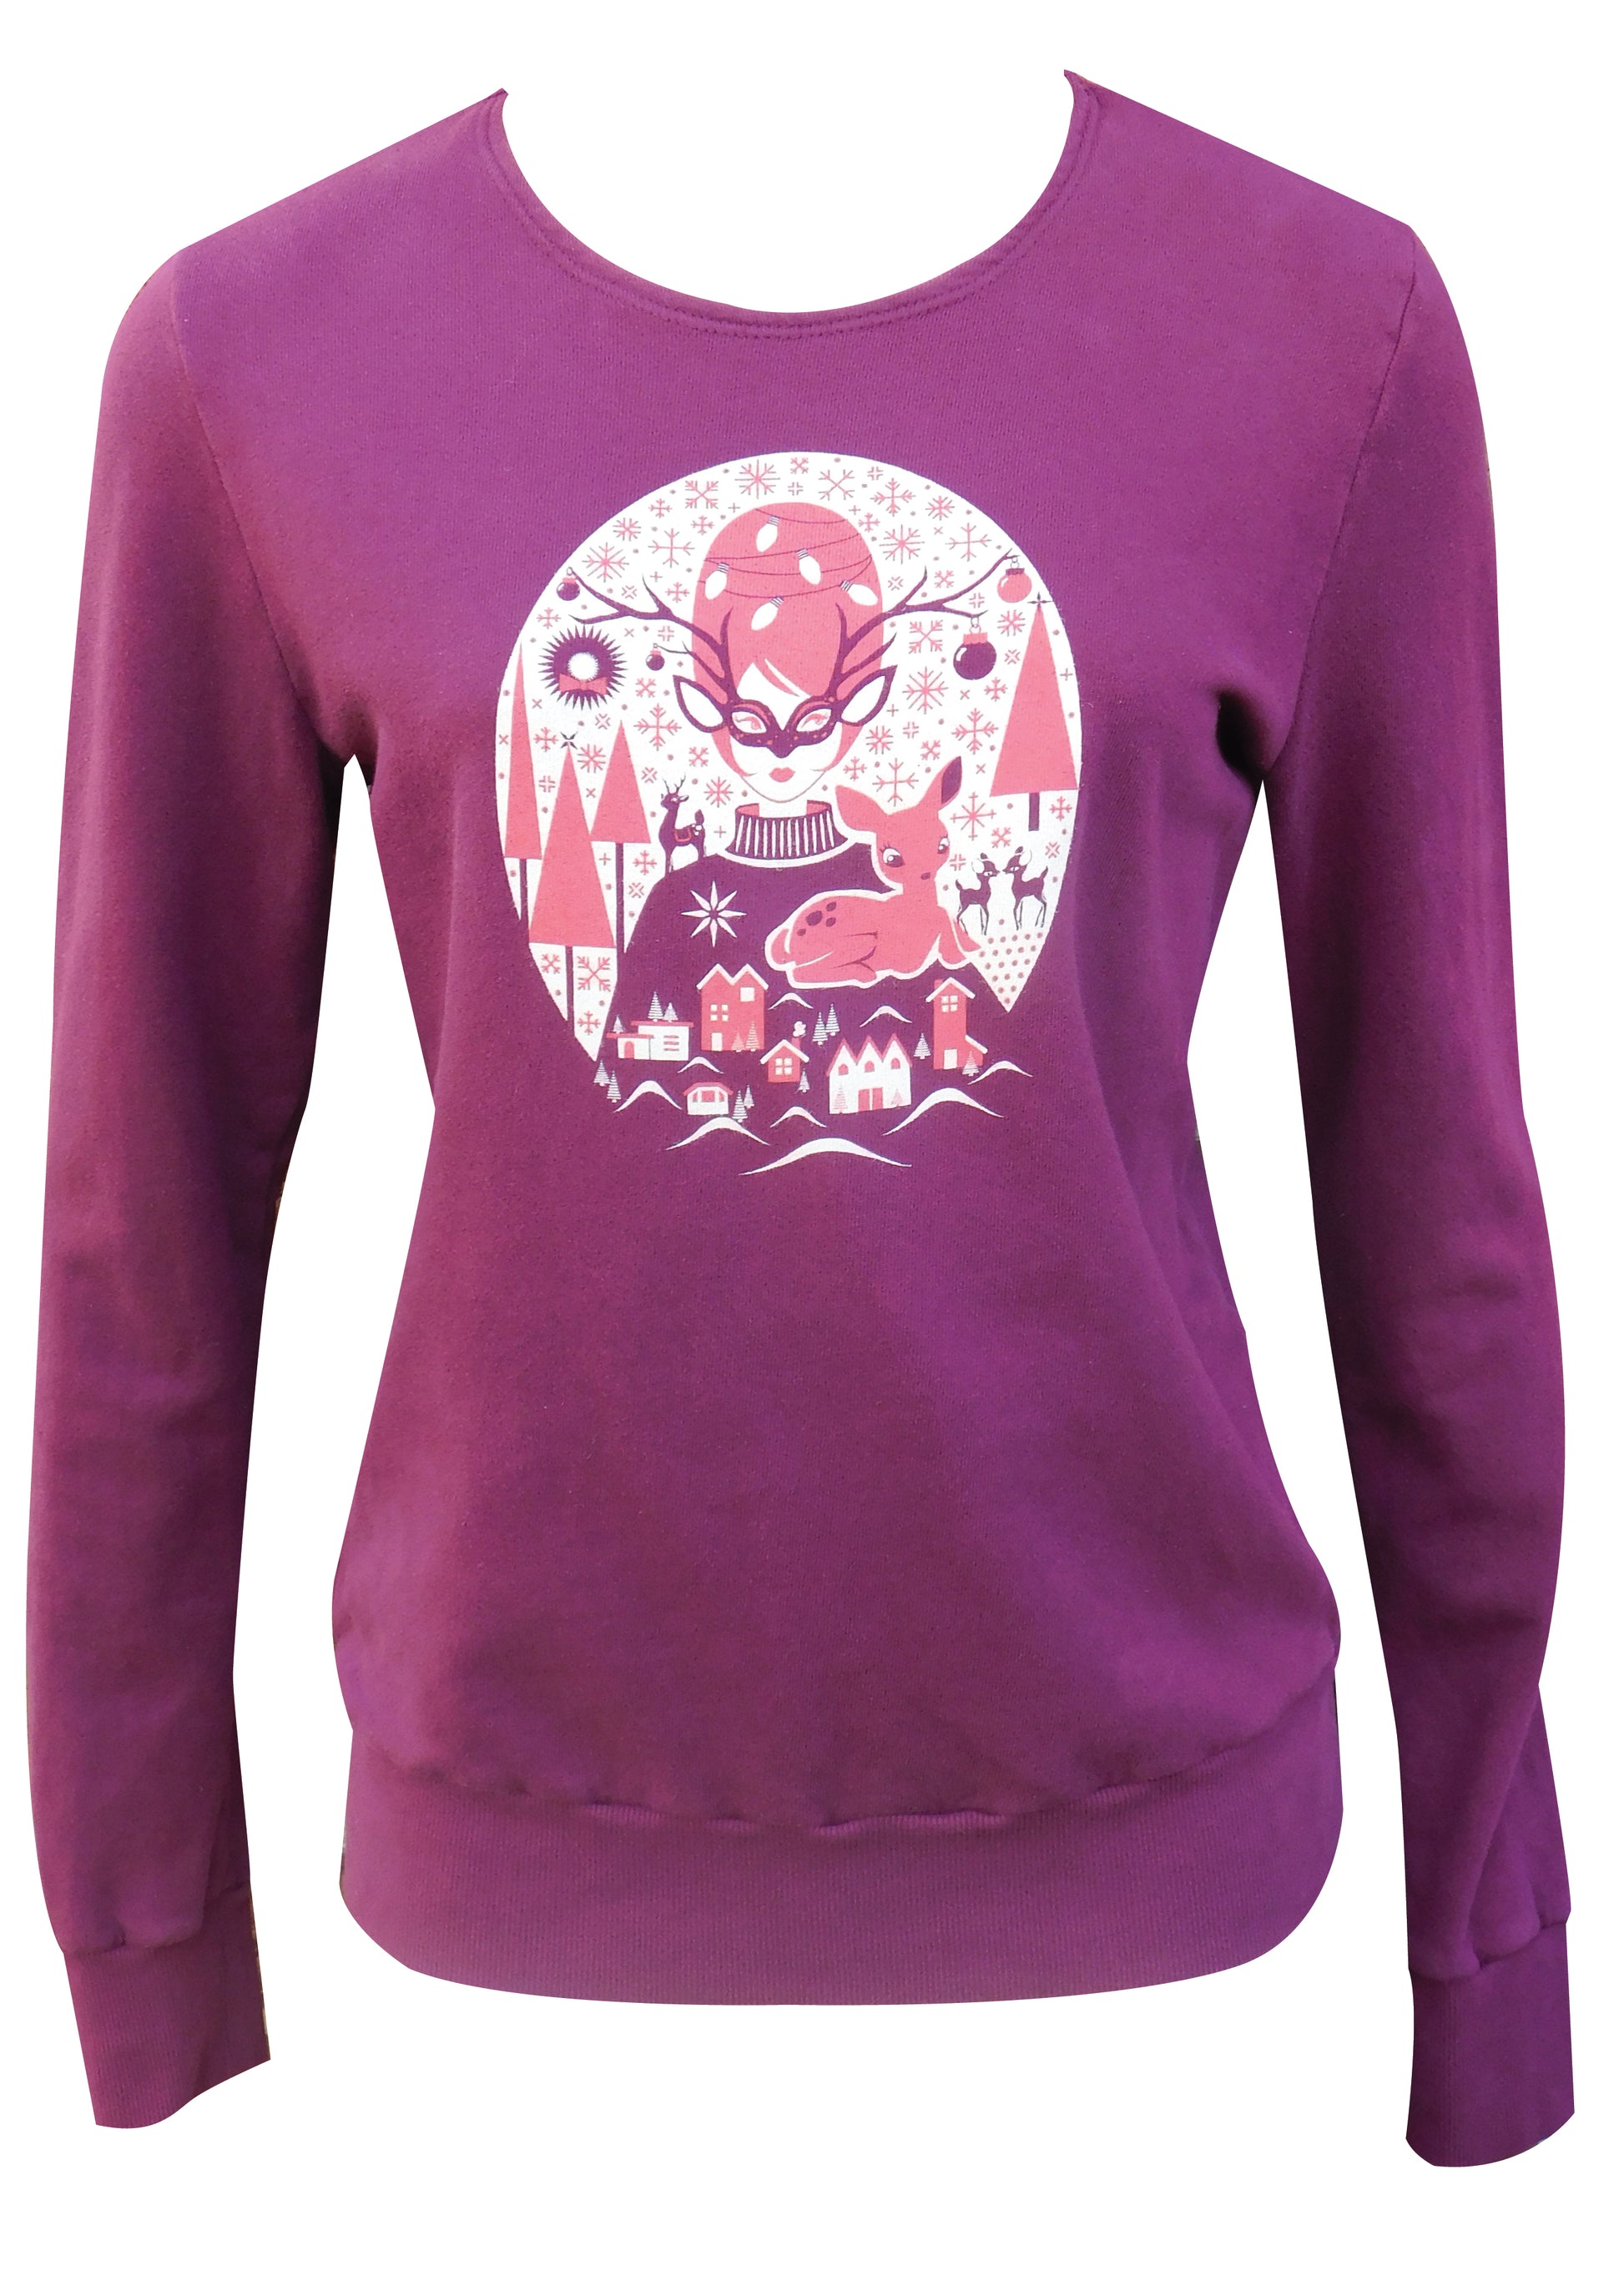 Plum sweatshirt with red and white graphic of Christmas girl, reindeer, and pine trees